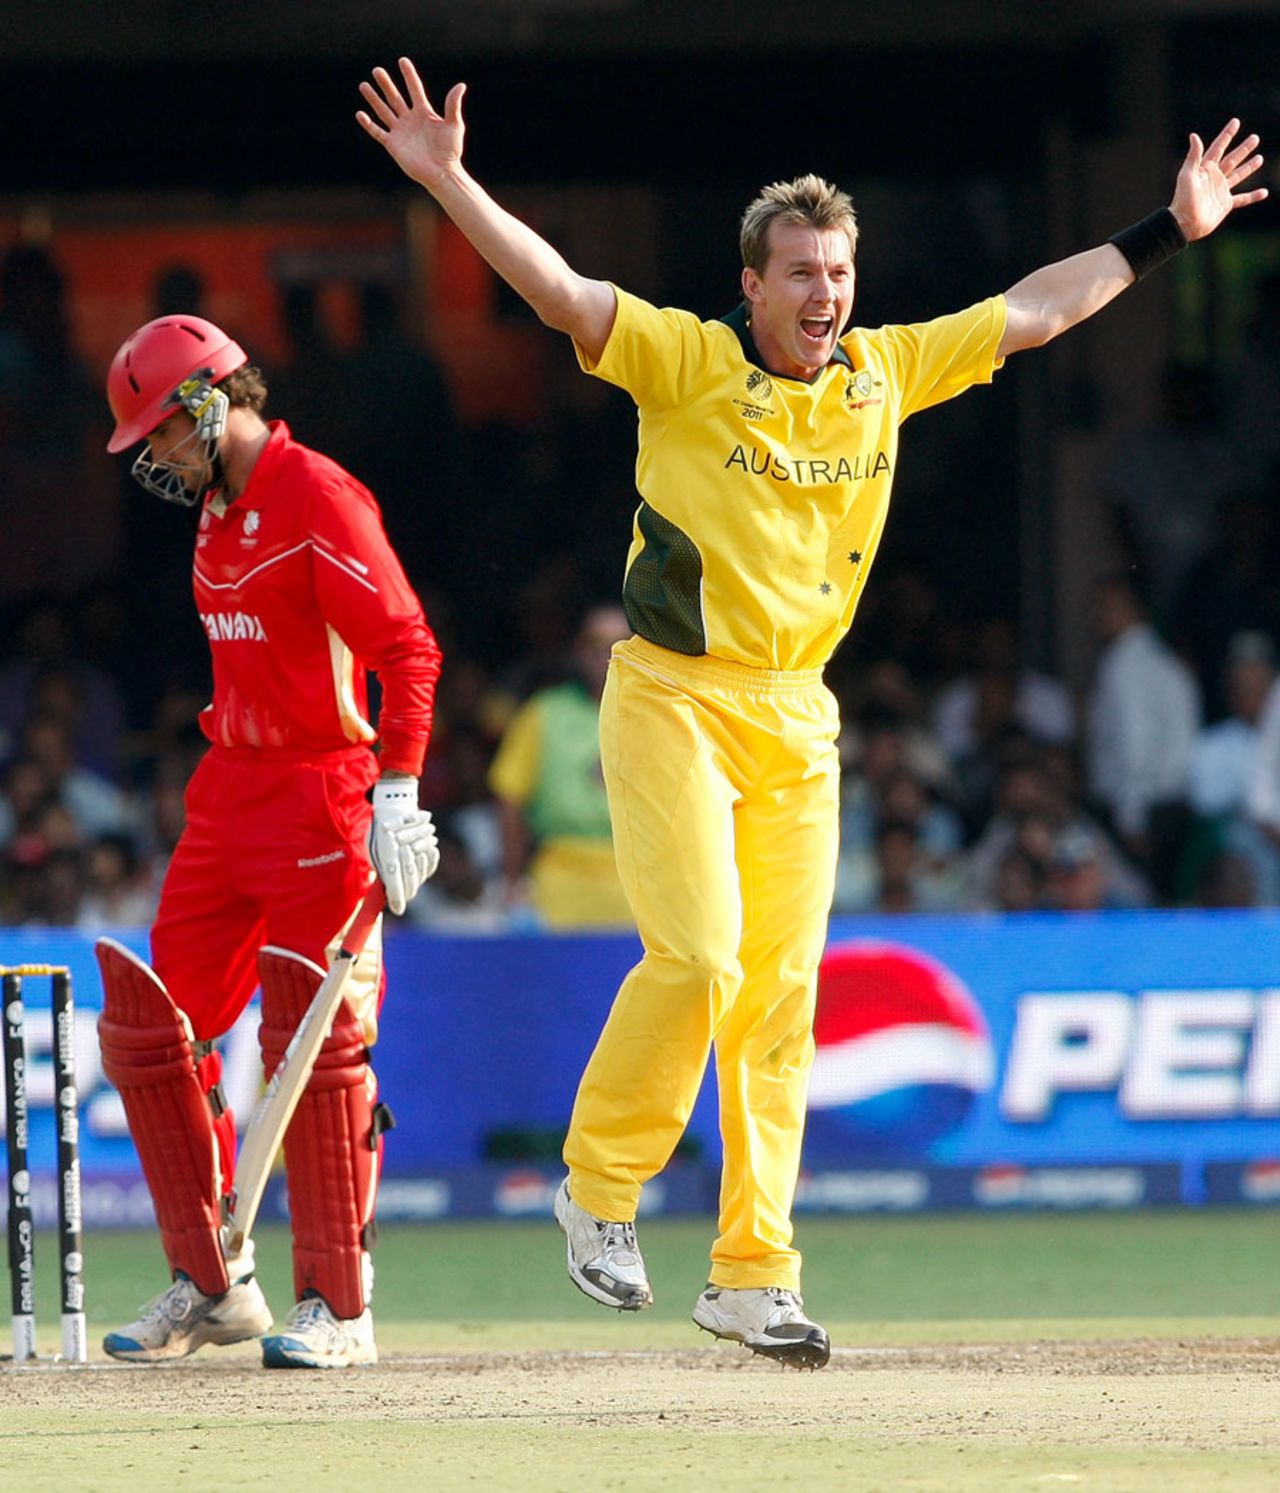 Brett Lee appeals for the wicket of Karl Whatham, Australia v Canada, Group A, World Cup, Bangalore, March 16, 2011